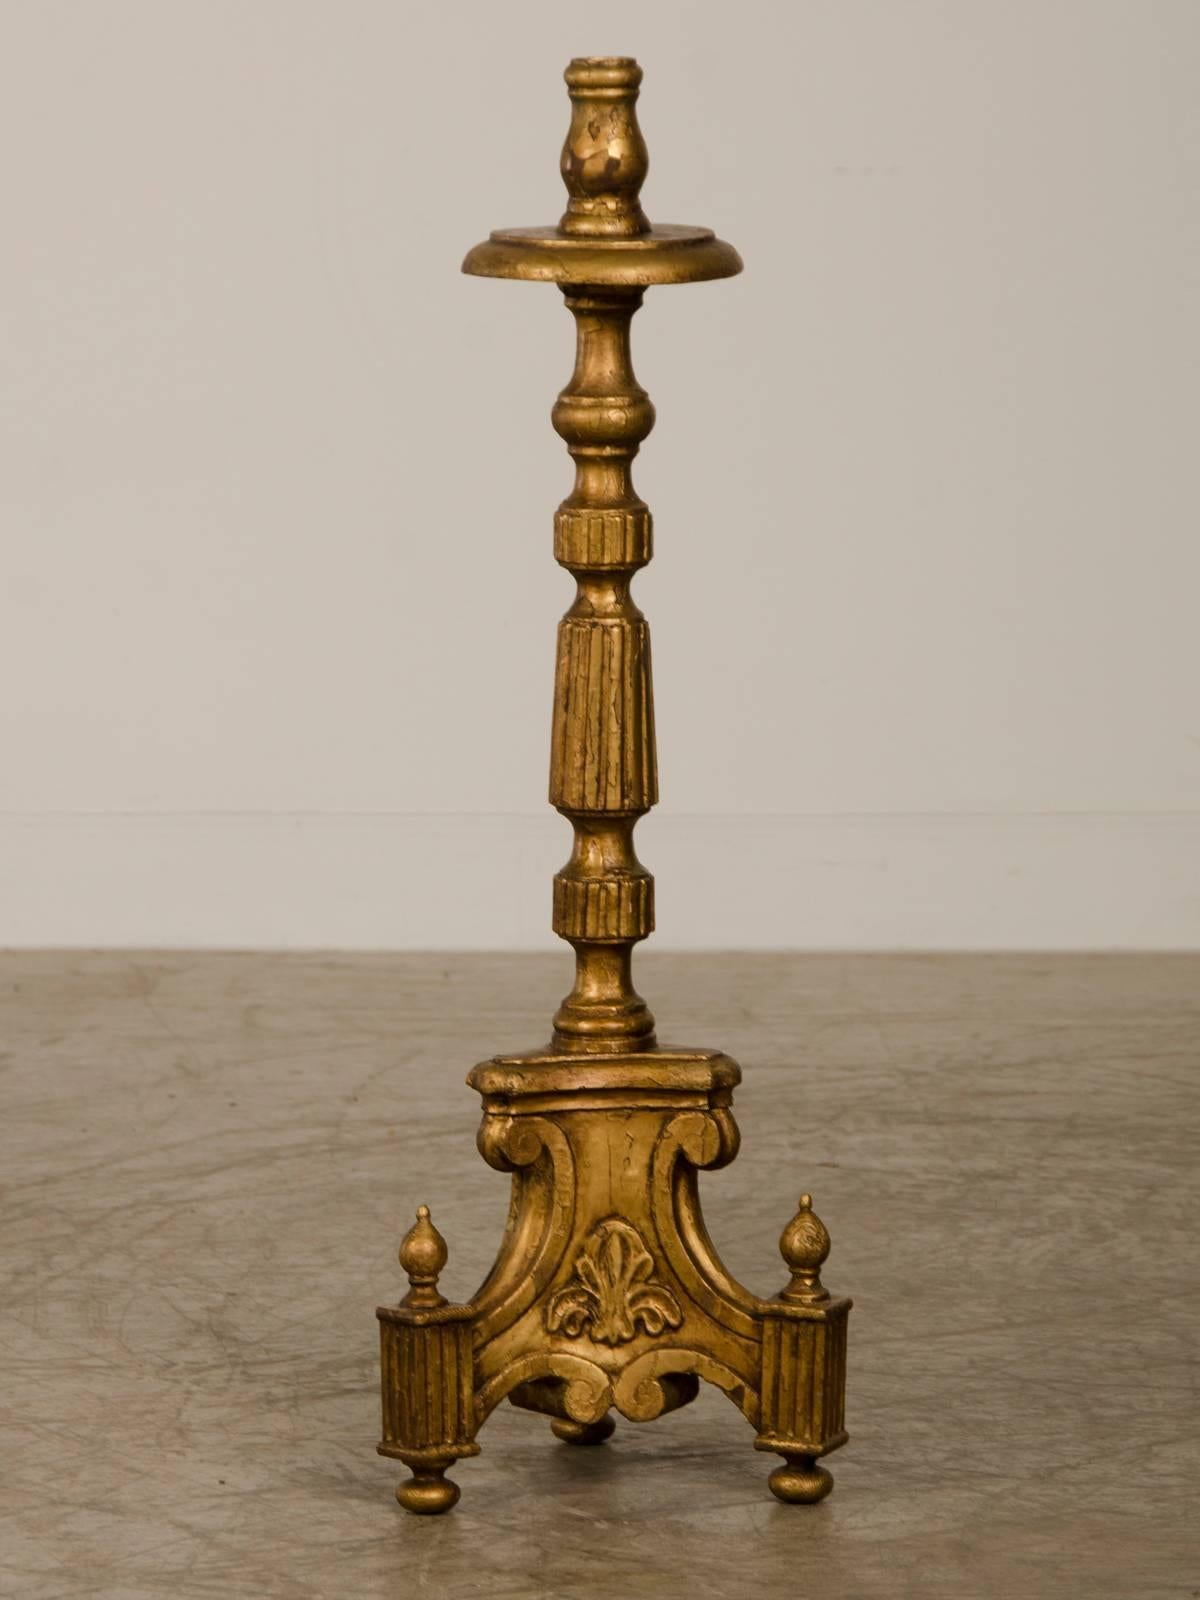 A handsome antique Italian neoclassical style gold leafed candlestick from Italy circa 1885. This elegant candle stick derives its visual appeal from the balance and symmetry of its constituent parts. The base of the candle stick has three sections